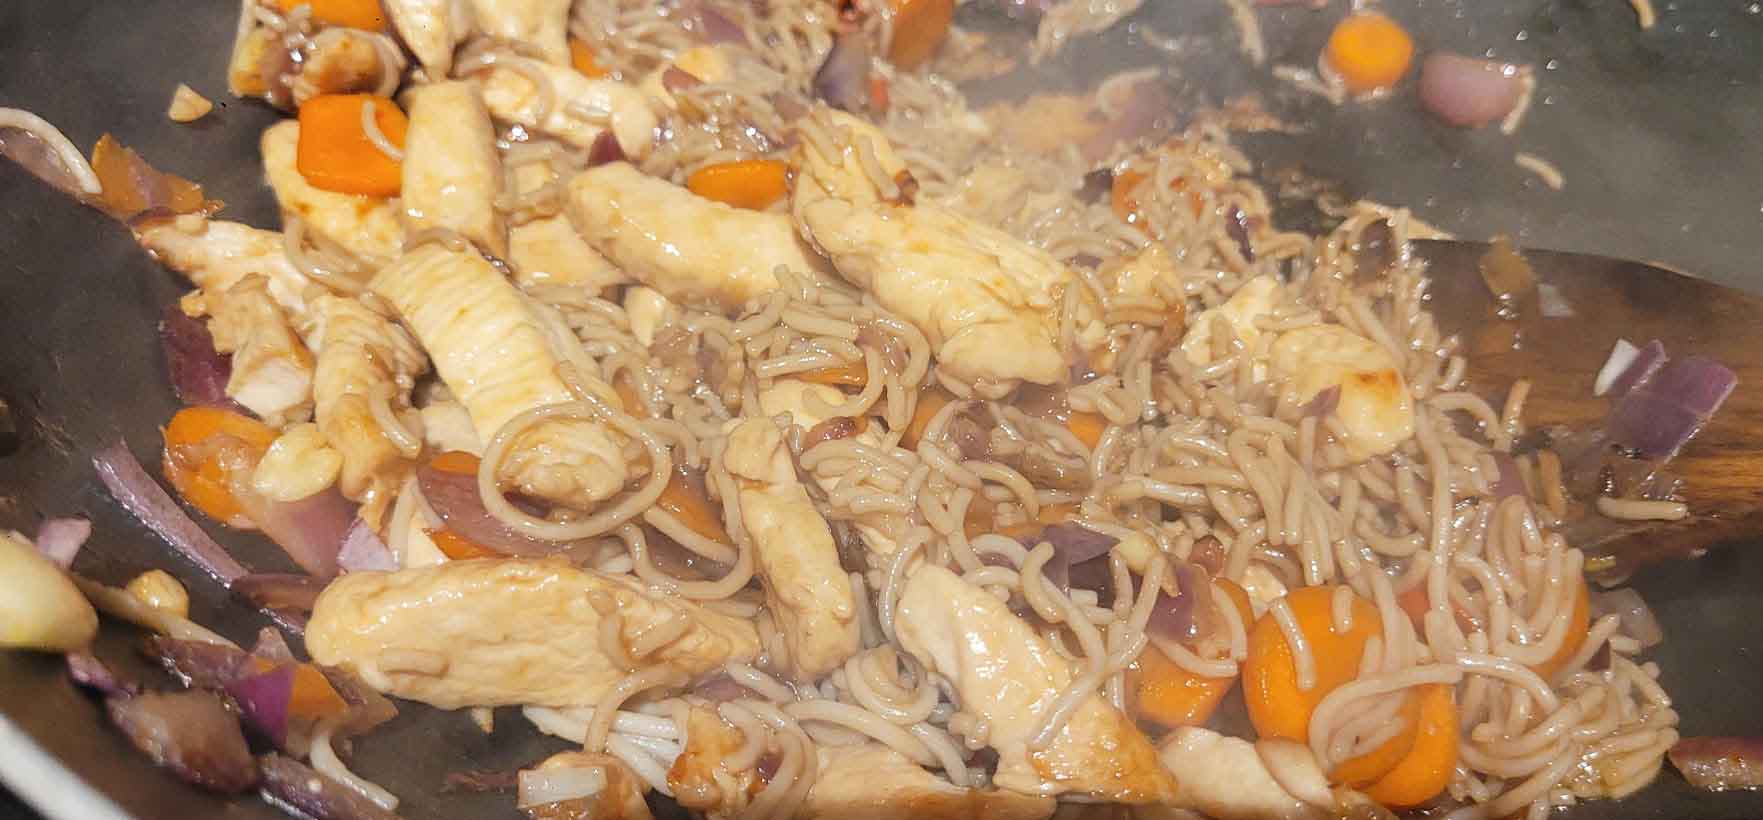 Healthy and Easy Stir-Fried Buckwheat Noodles with Chicken Mix Together Thoroughly